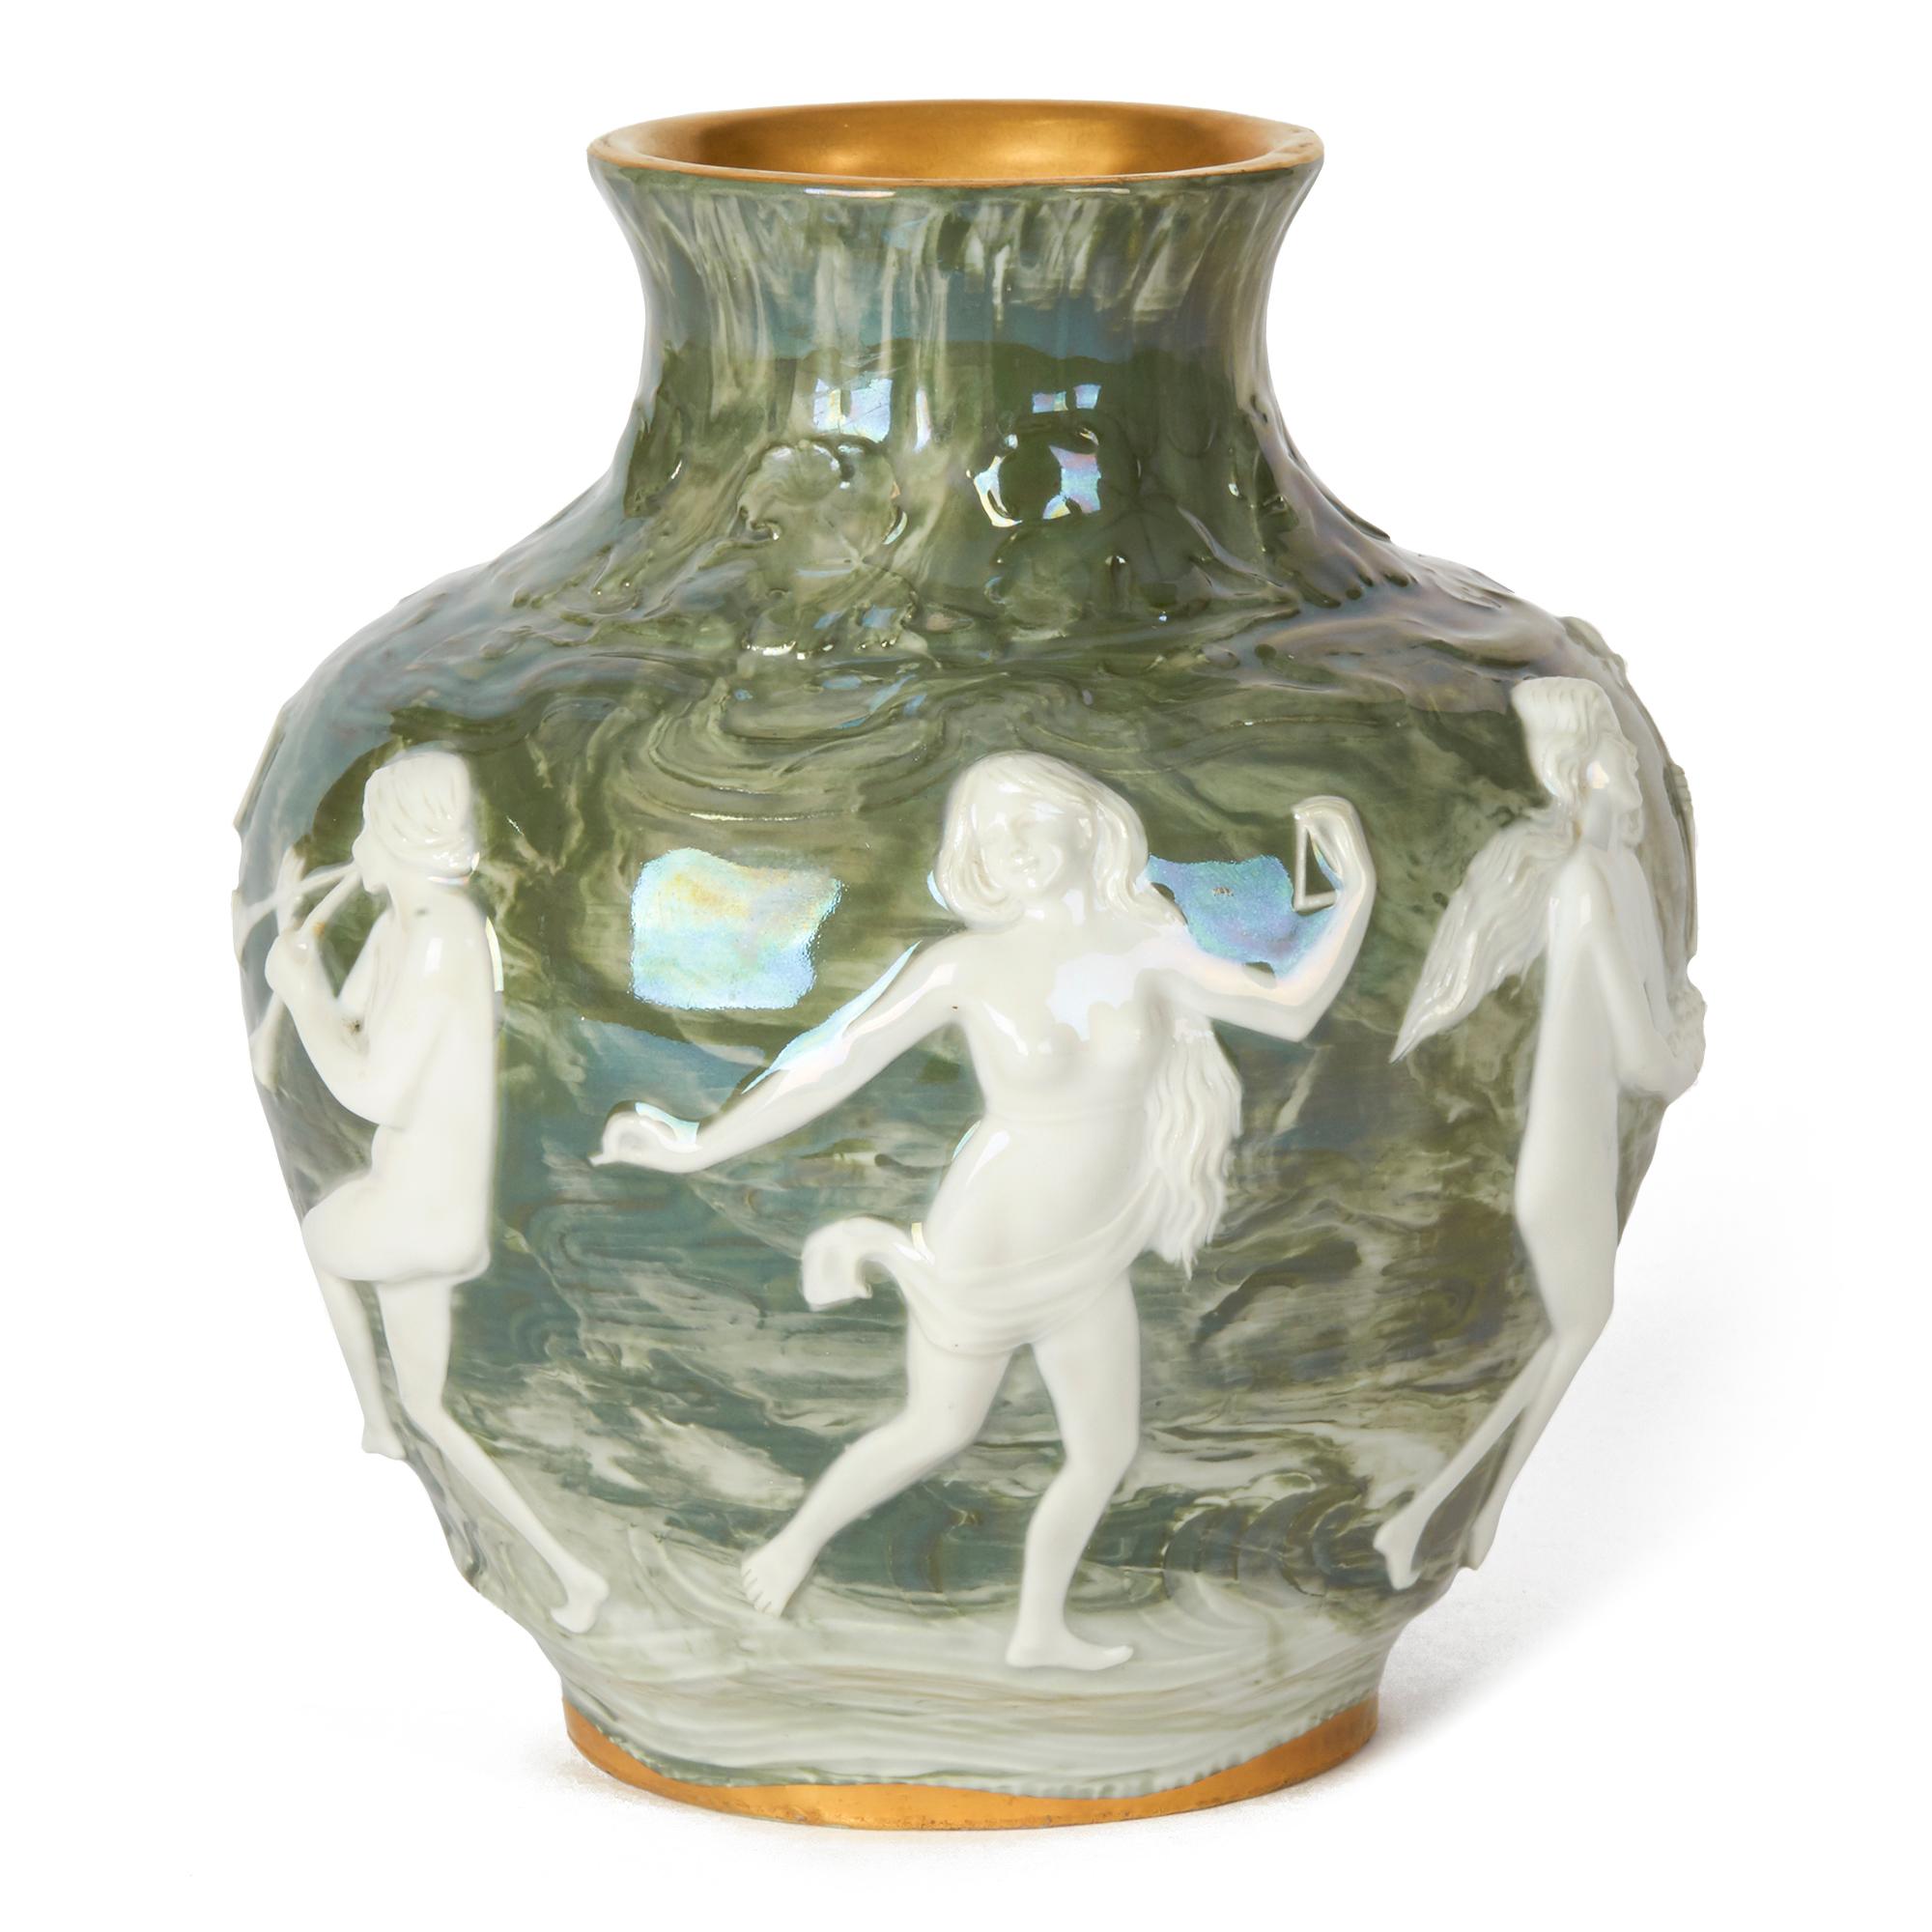 Austrian Adolph Oppel Kronach Art Nouveau Pottery Vase with Maidens, circa 1900 For Sale